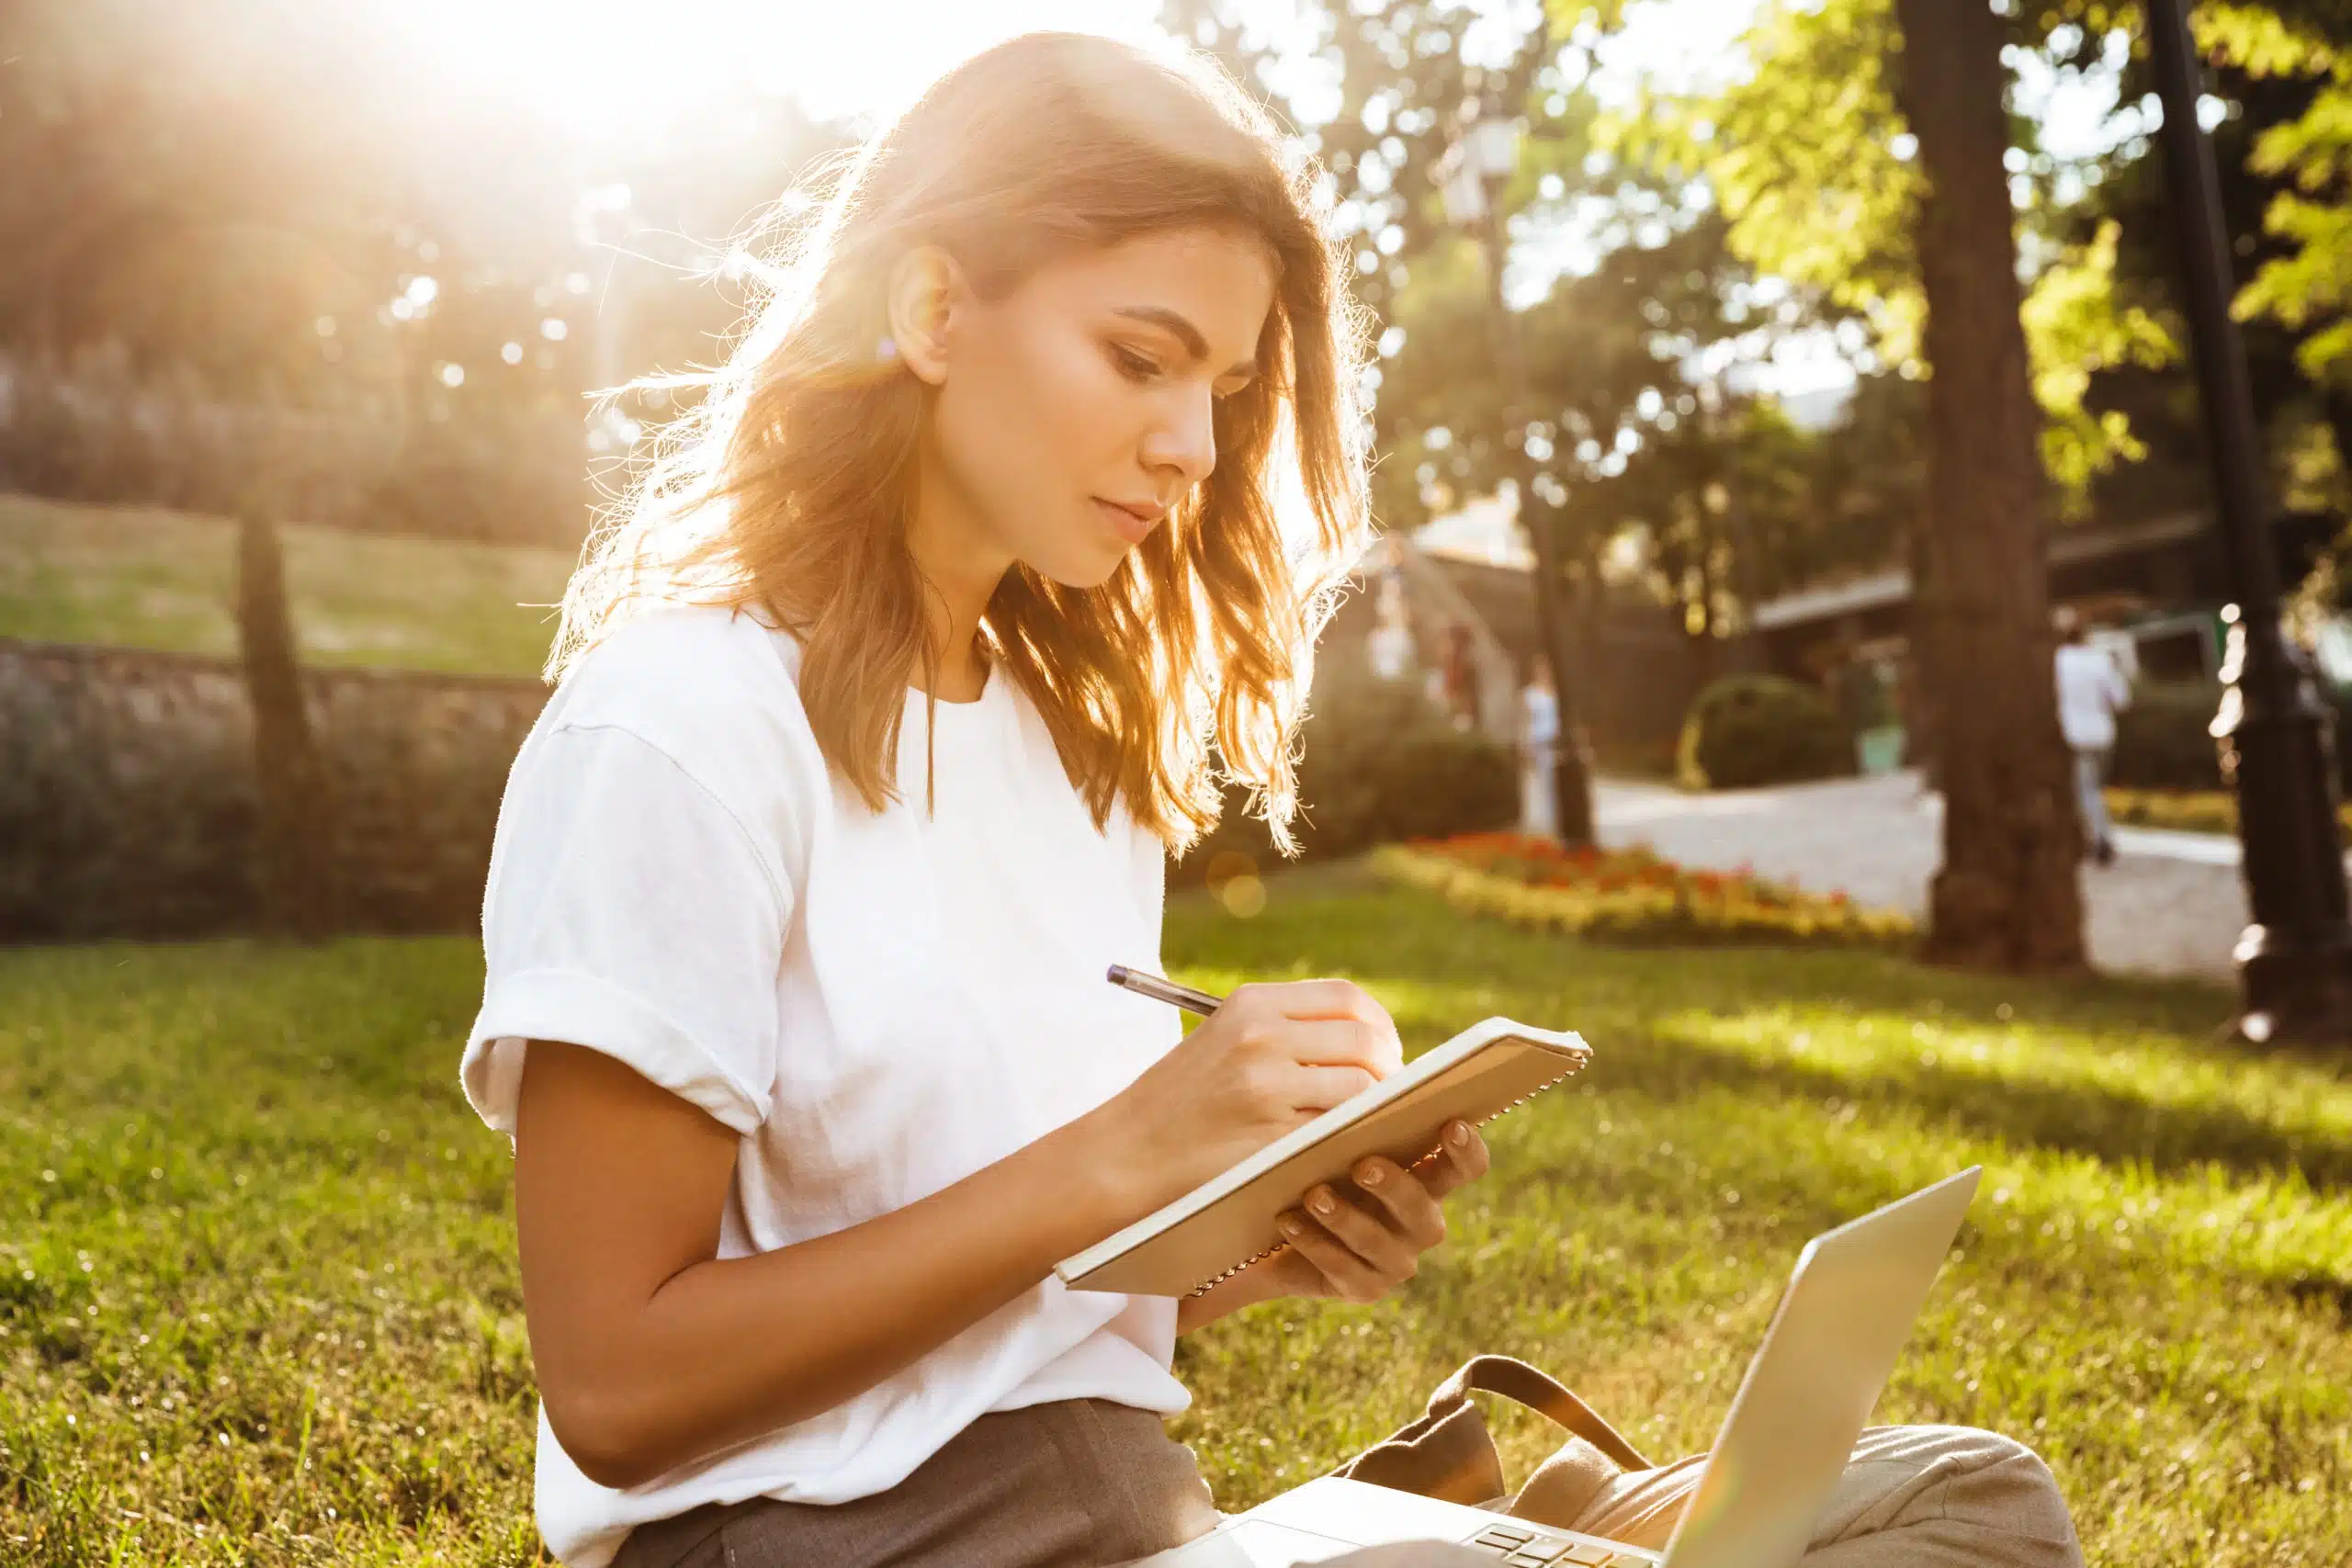 Young woman sitting on green grass in the park sunlit writing in her notebook.